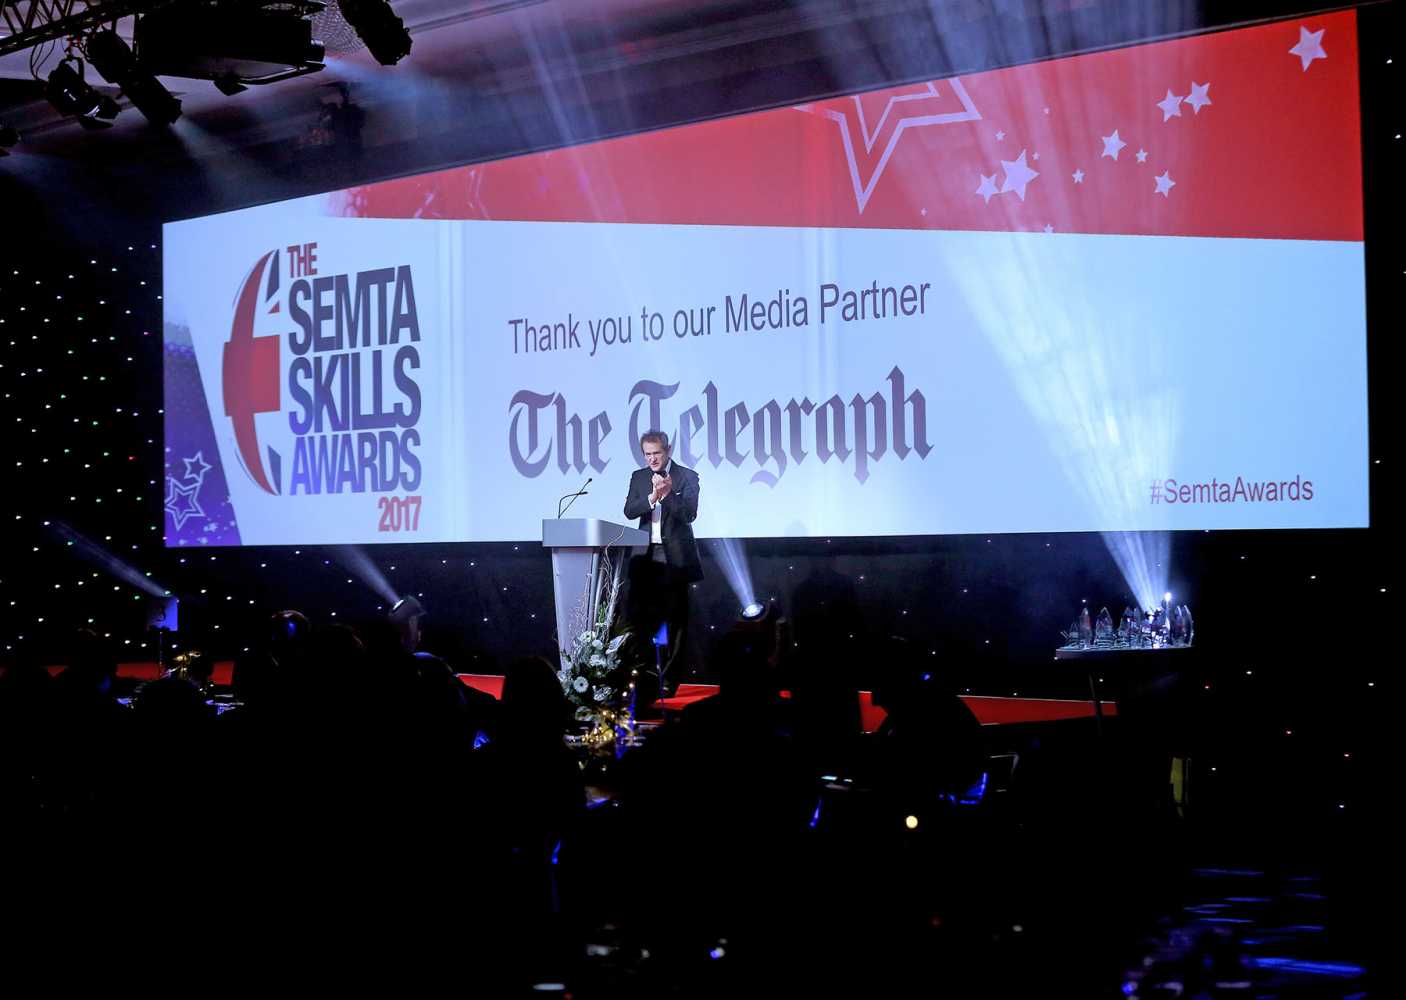 The 2017 SEMTA Awards event was staged in the ballroom of the Hilton Hotel in Park Lane, London